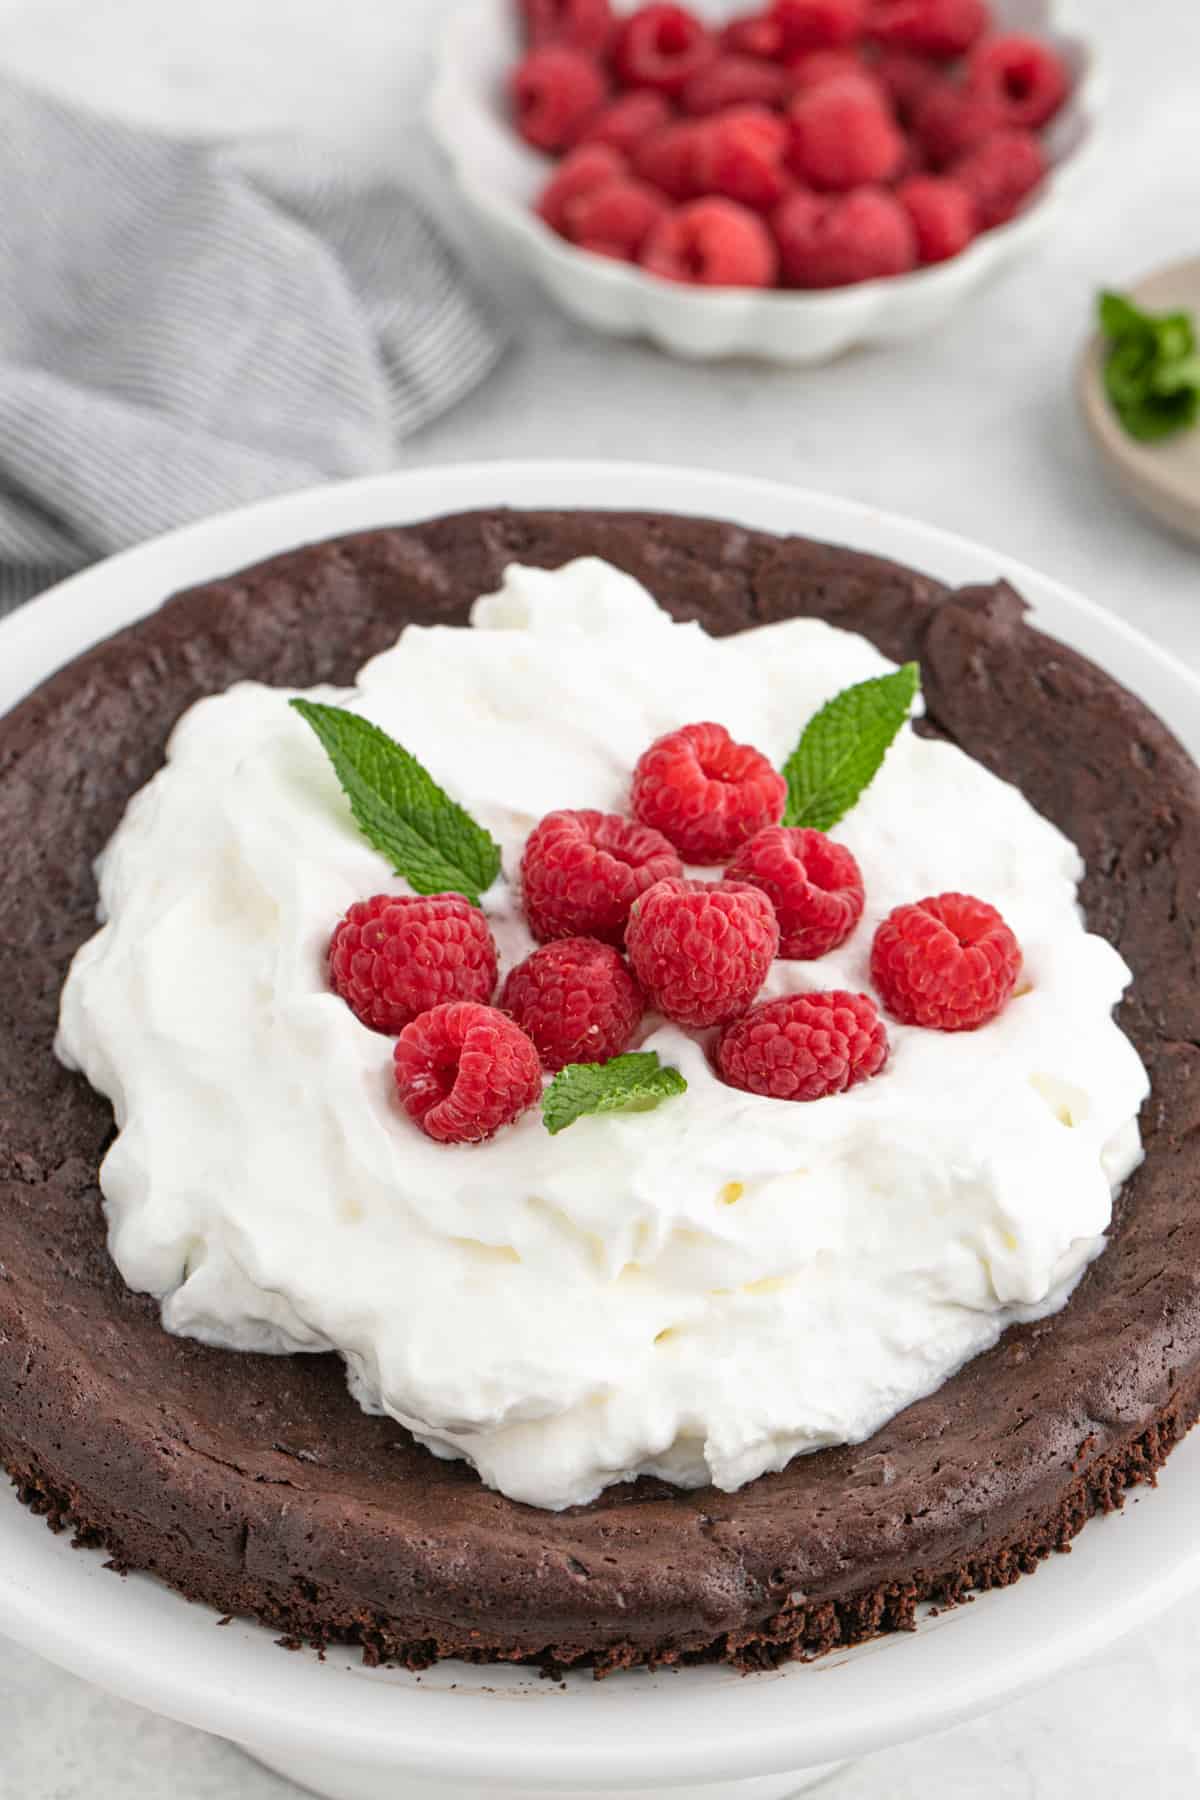 A close up of flourless chocolate cake with berries and whipped cream